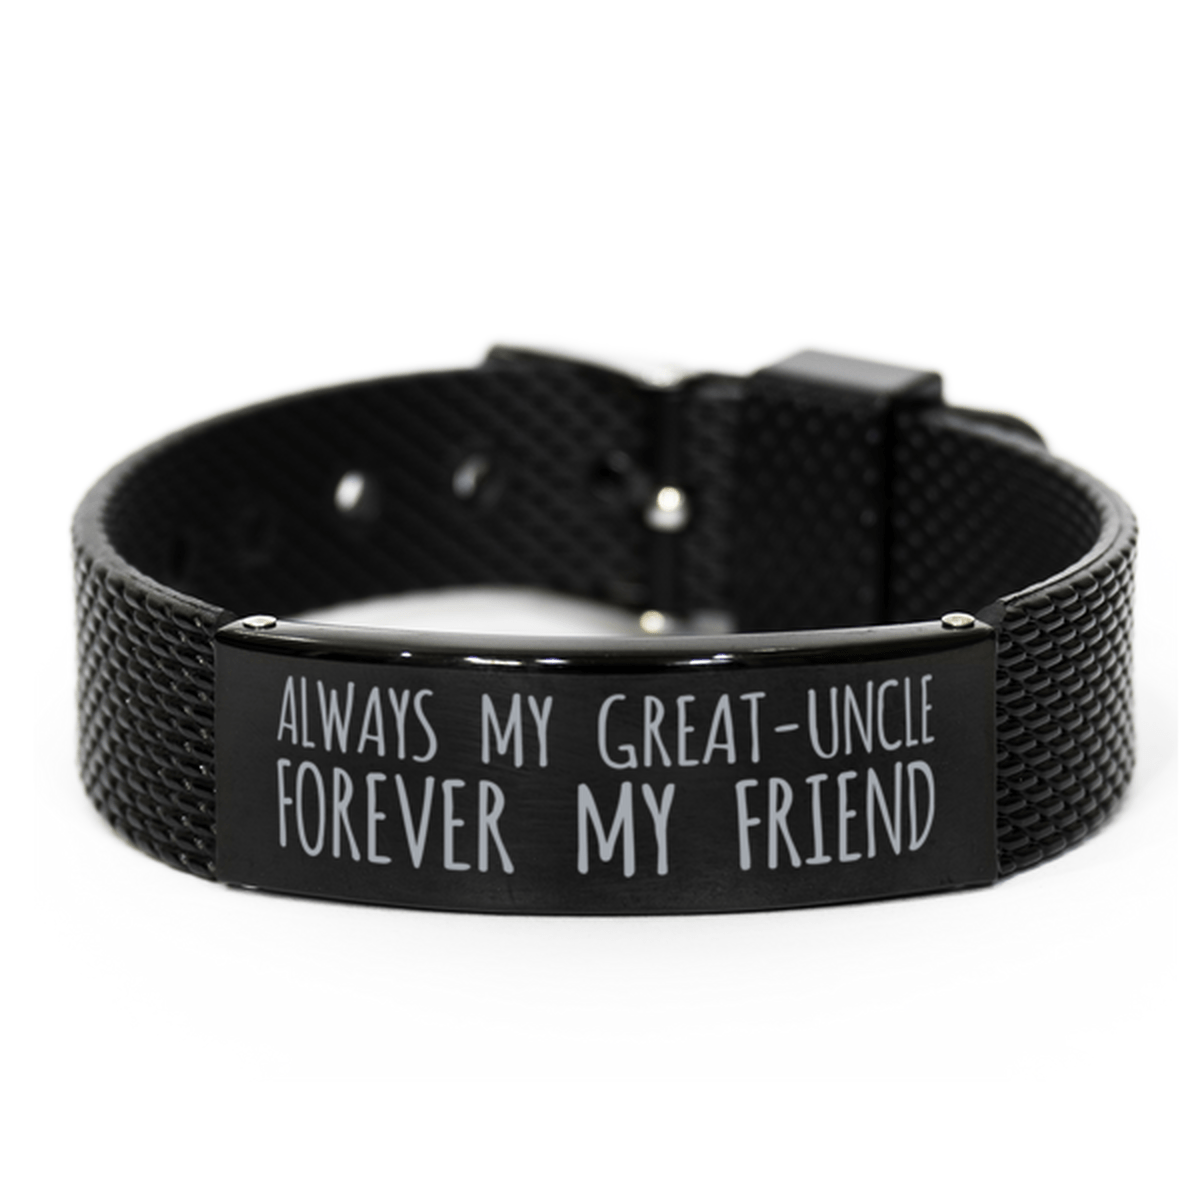 Inspirational Great Uncle Black Shark Mesh Bracelet, Always My Great Uncle Forever My Friend, Best Birthday Gifts for Family Friends